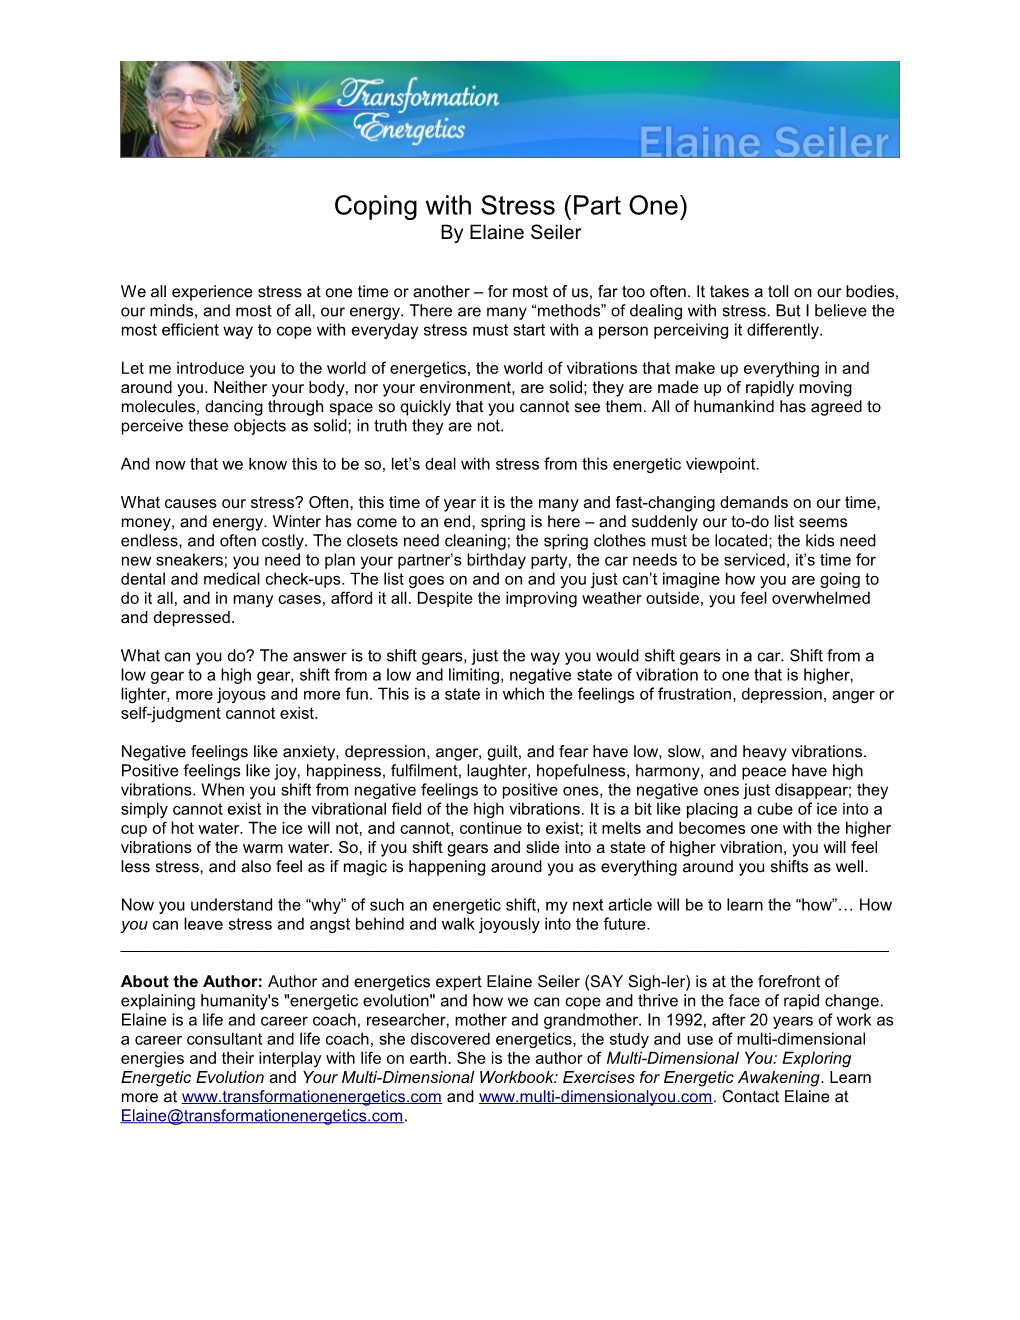 Coping with Stress (Part One) by Elaine Seiler